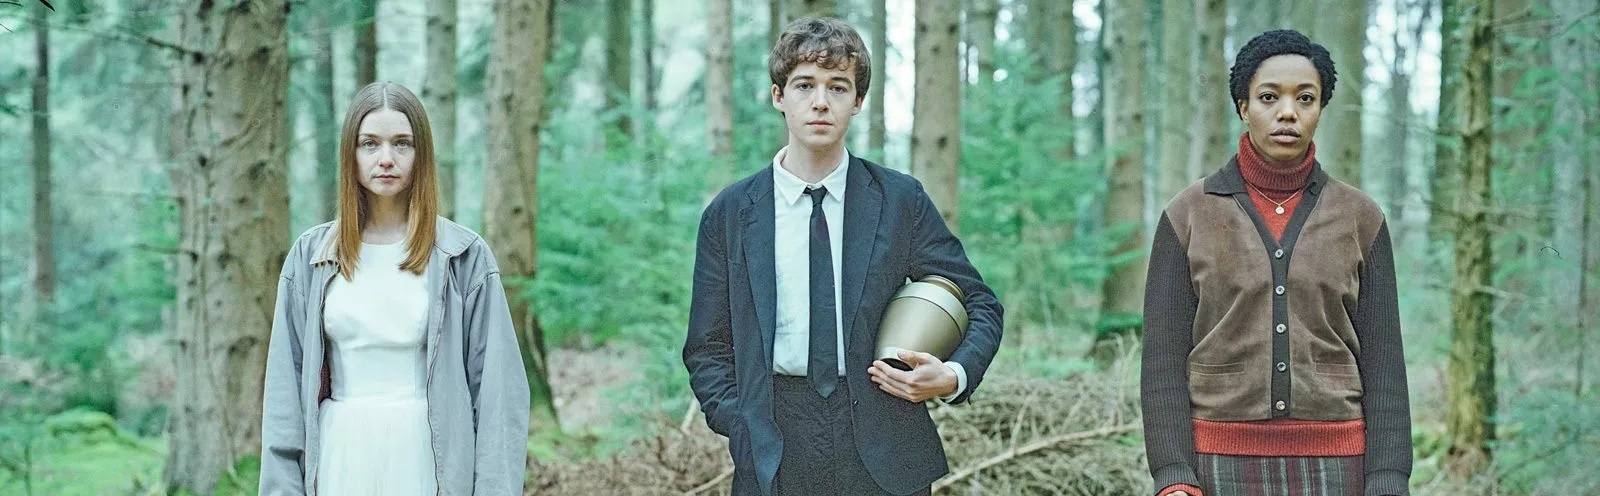 Three characters from the show The End of the F***ing World stand in a line in front of a stand of trees.